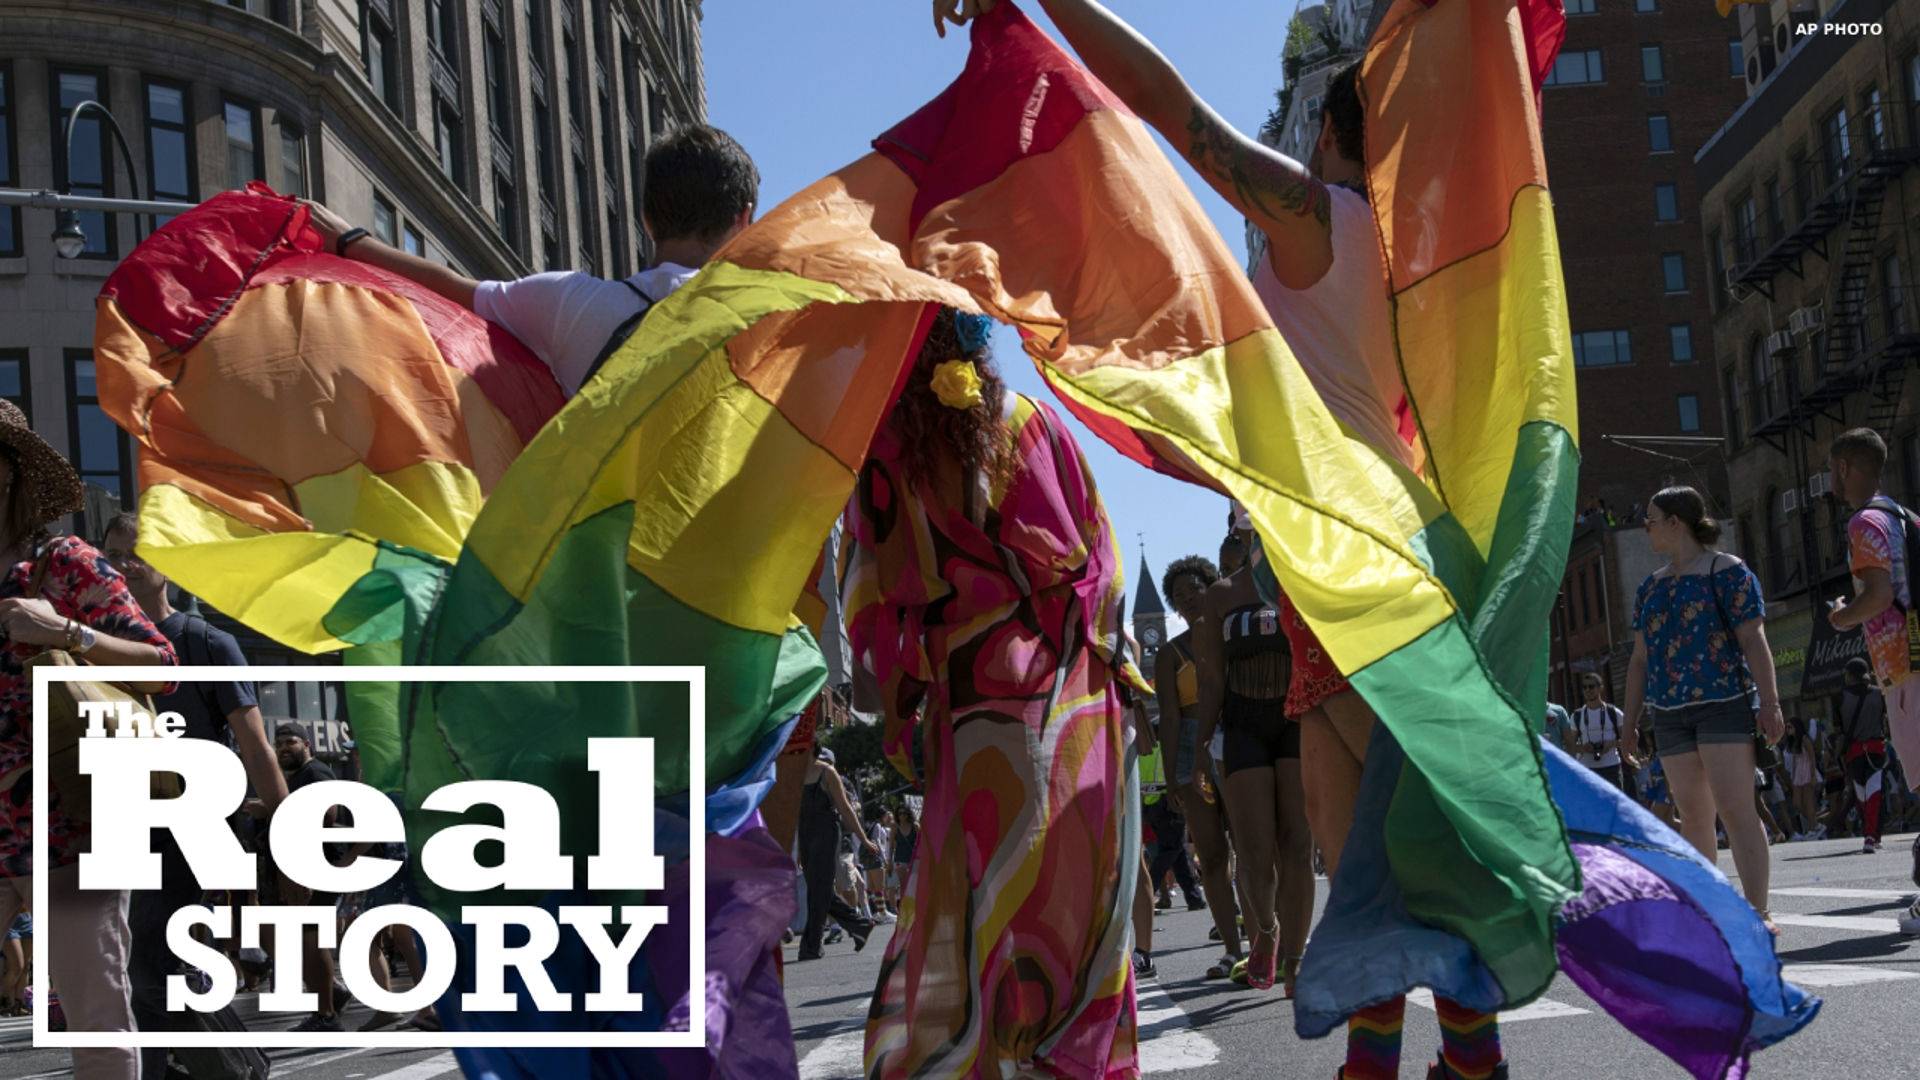 Equality Connecticut is a organization tackling advocacy across the state for LGBTQIA+ residents.